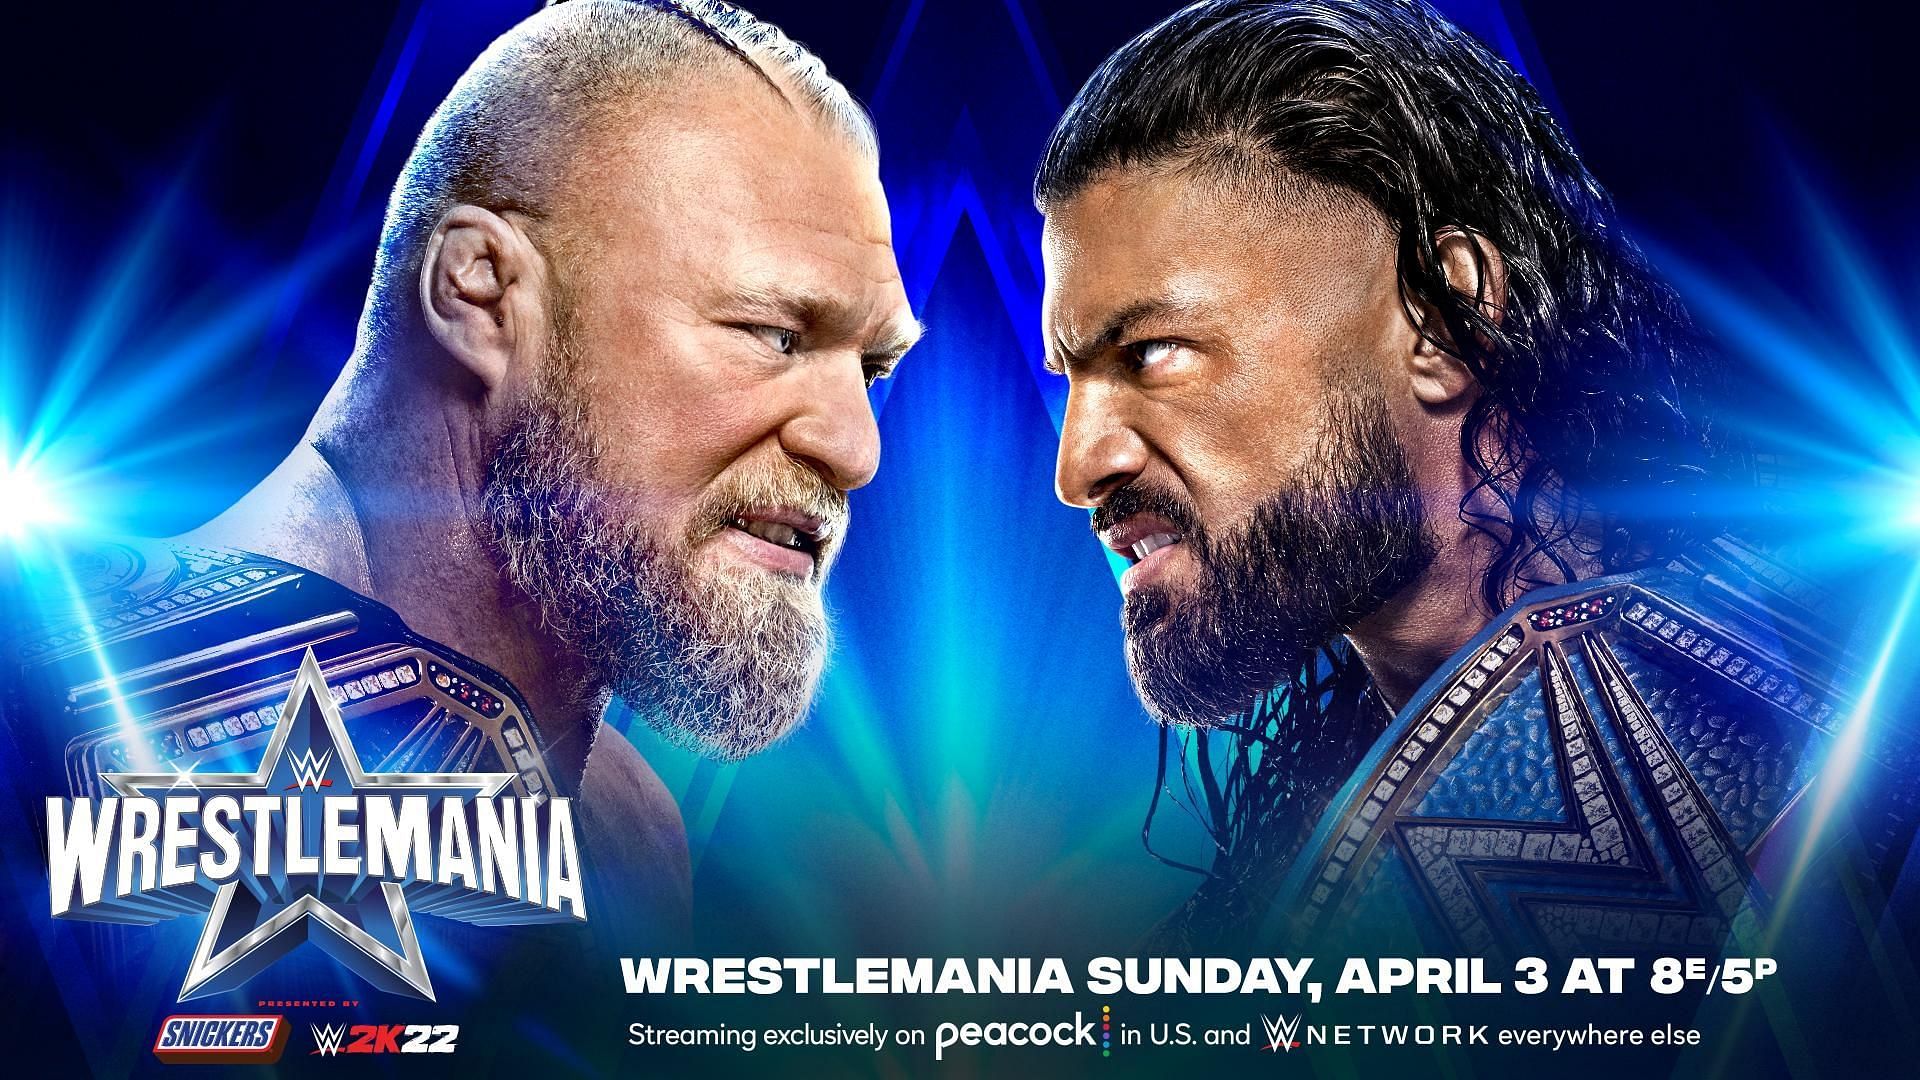 Brock Lesnar and Roman Reigns have signed the contract for their huge WWE WrestleMania match.